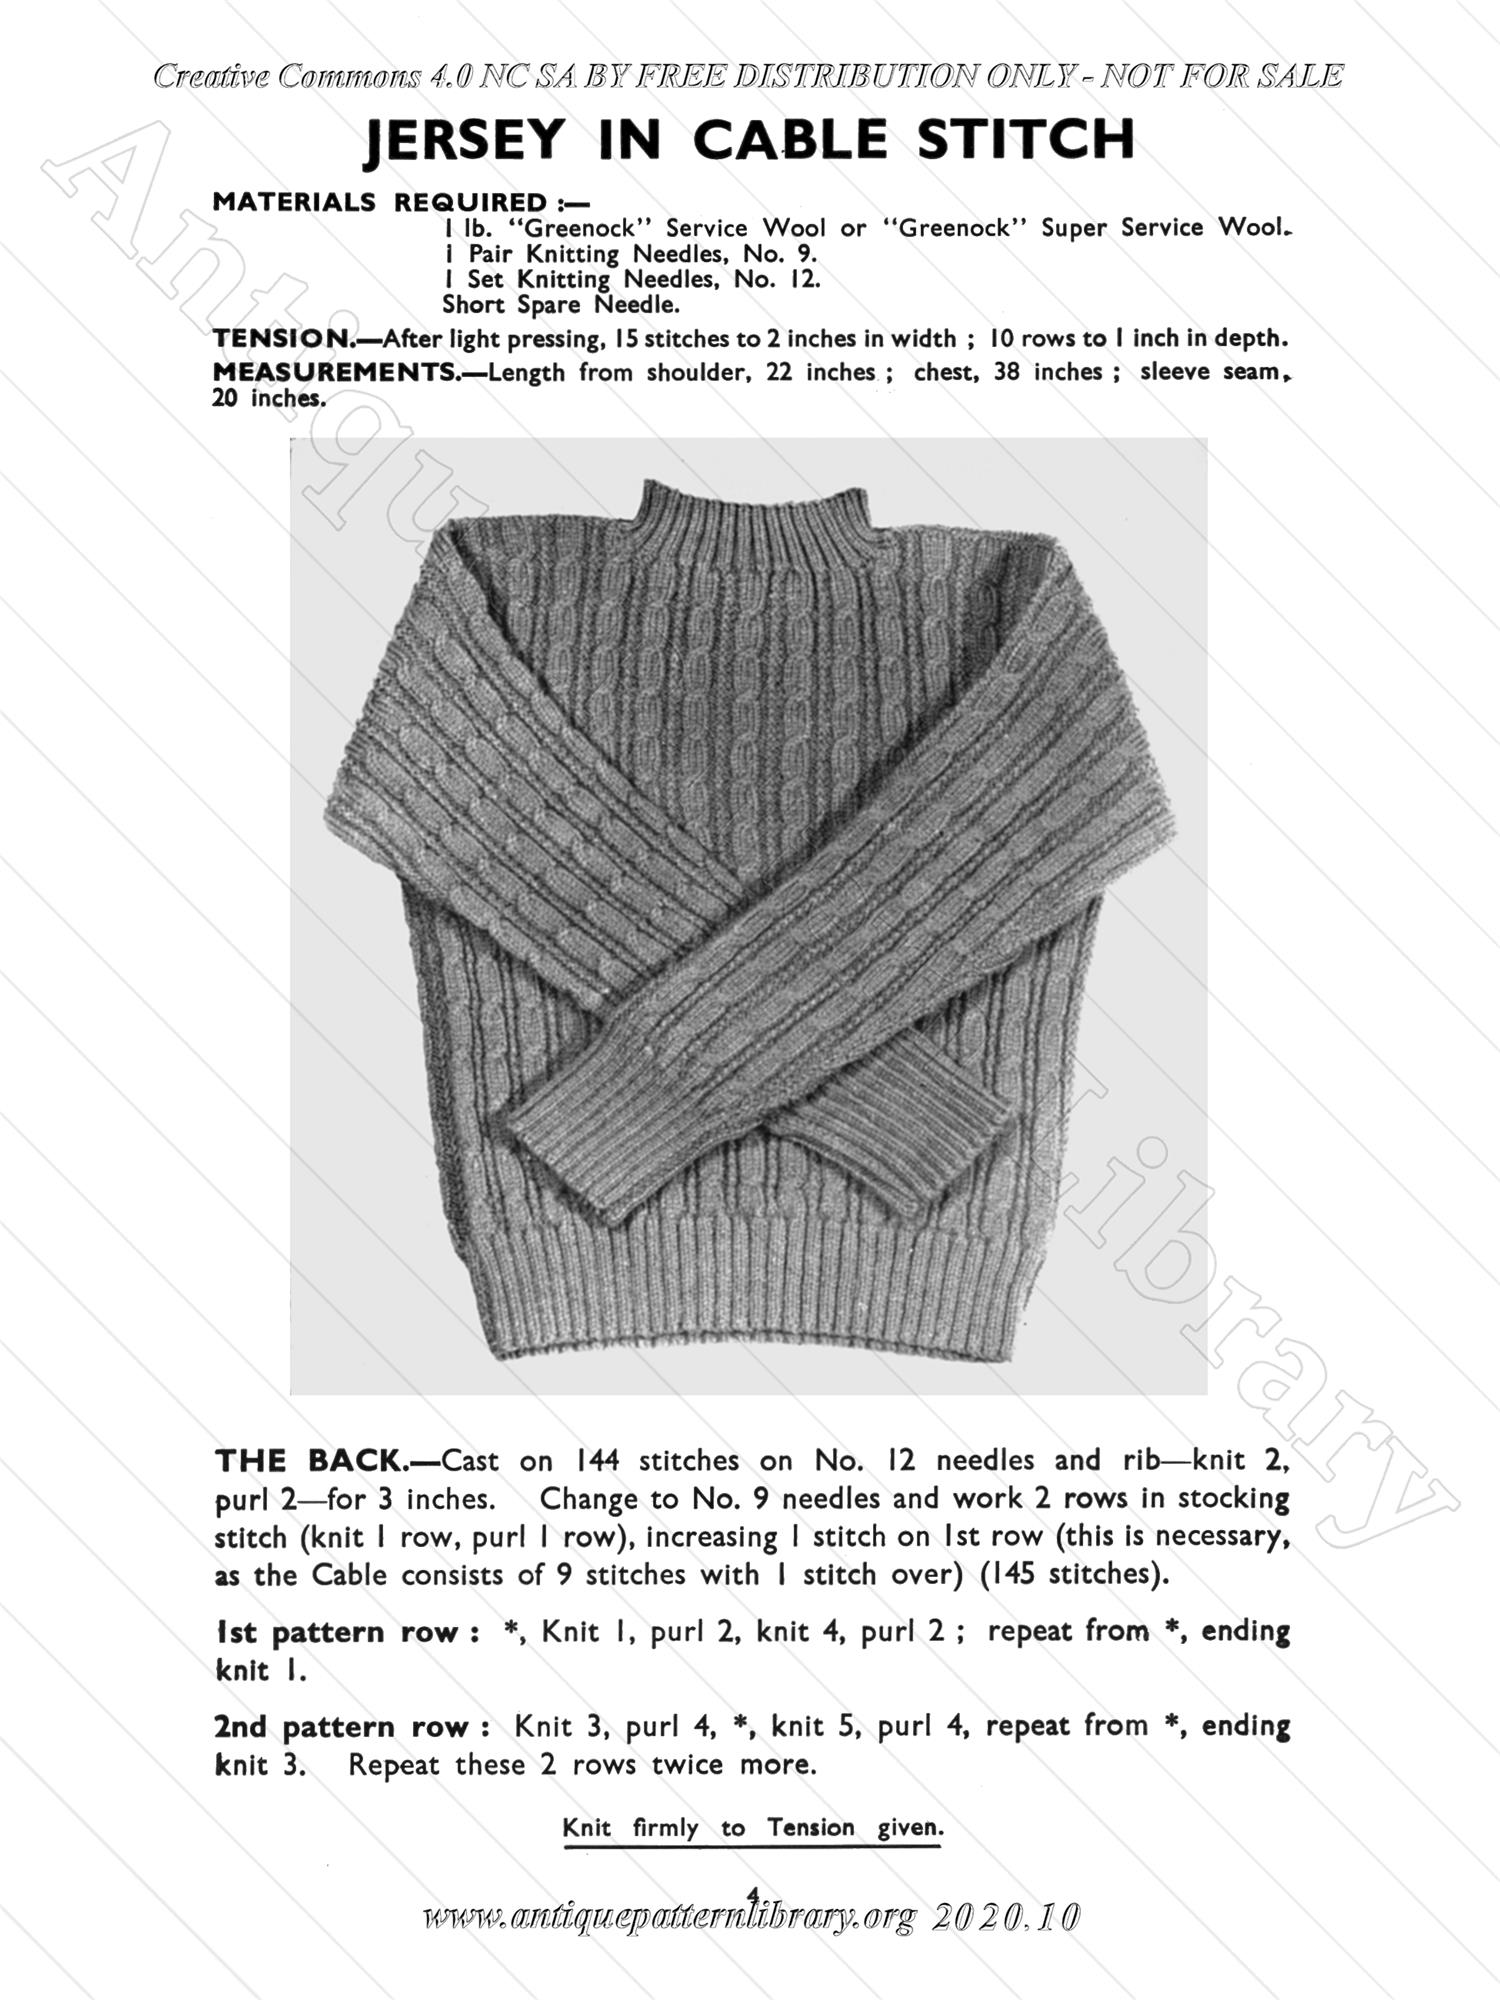 F-WM176 Knitted Comforts for Sailors, Soldiers and Airmen 